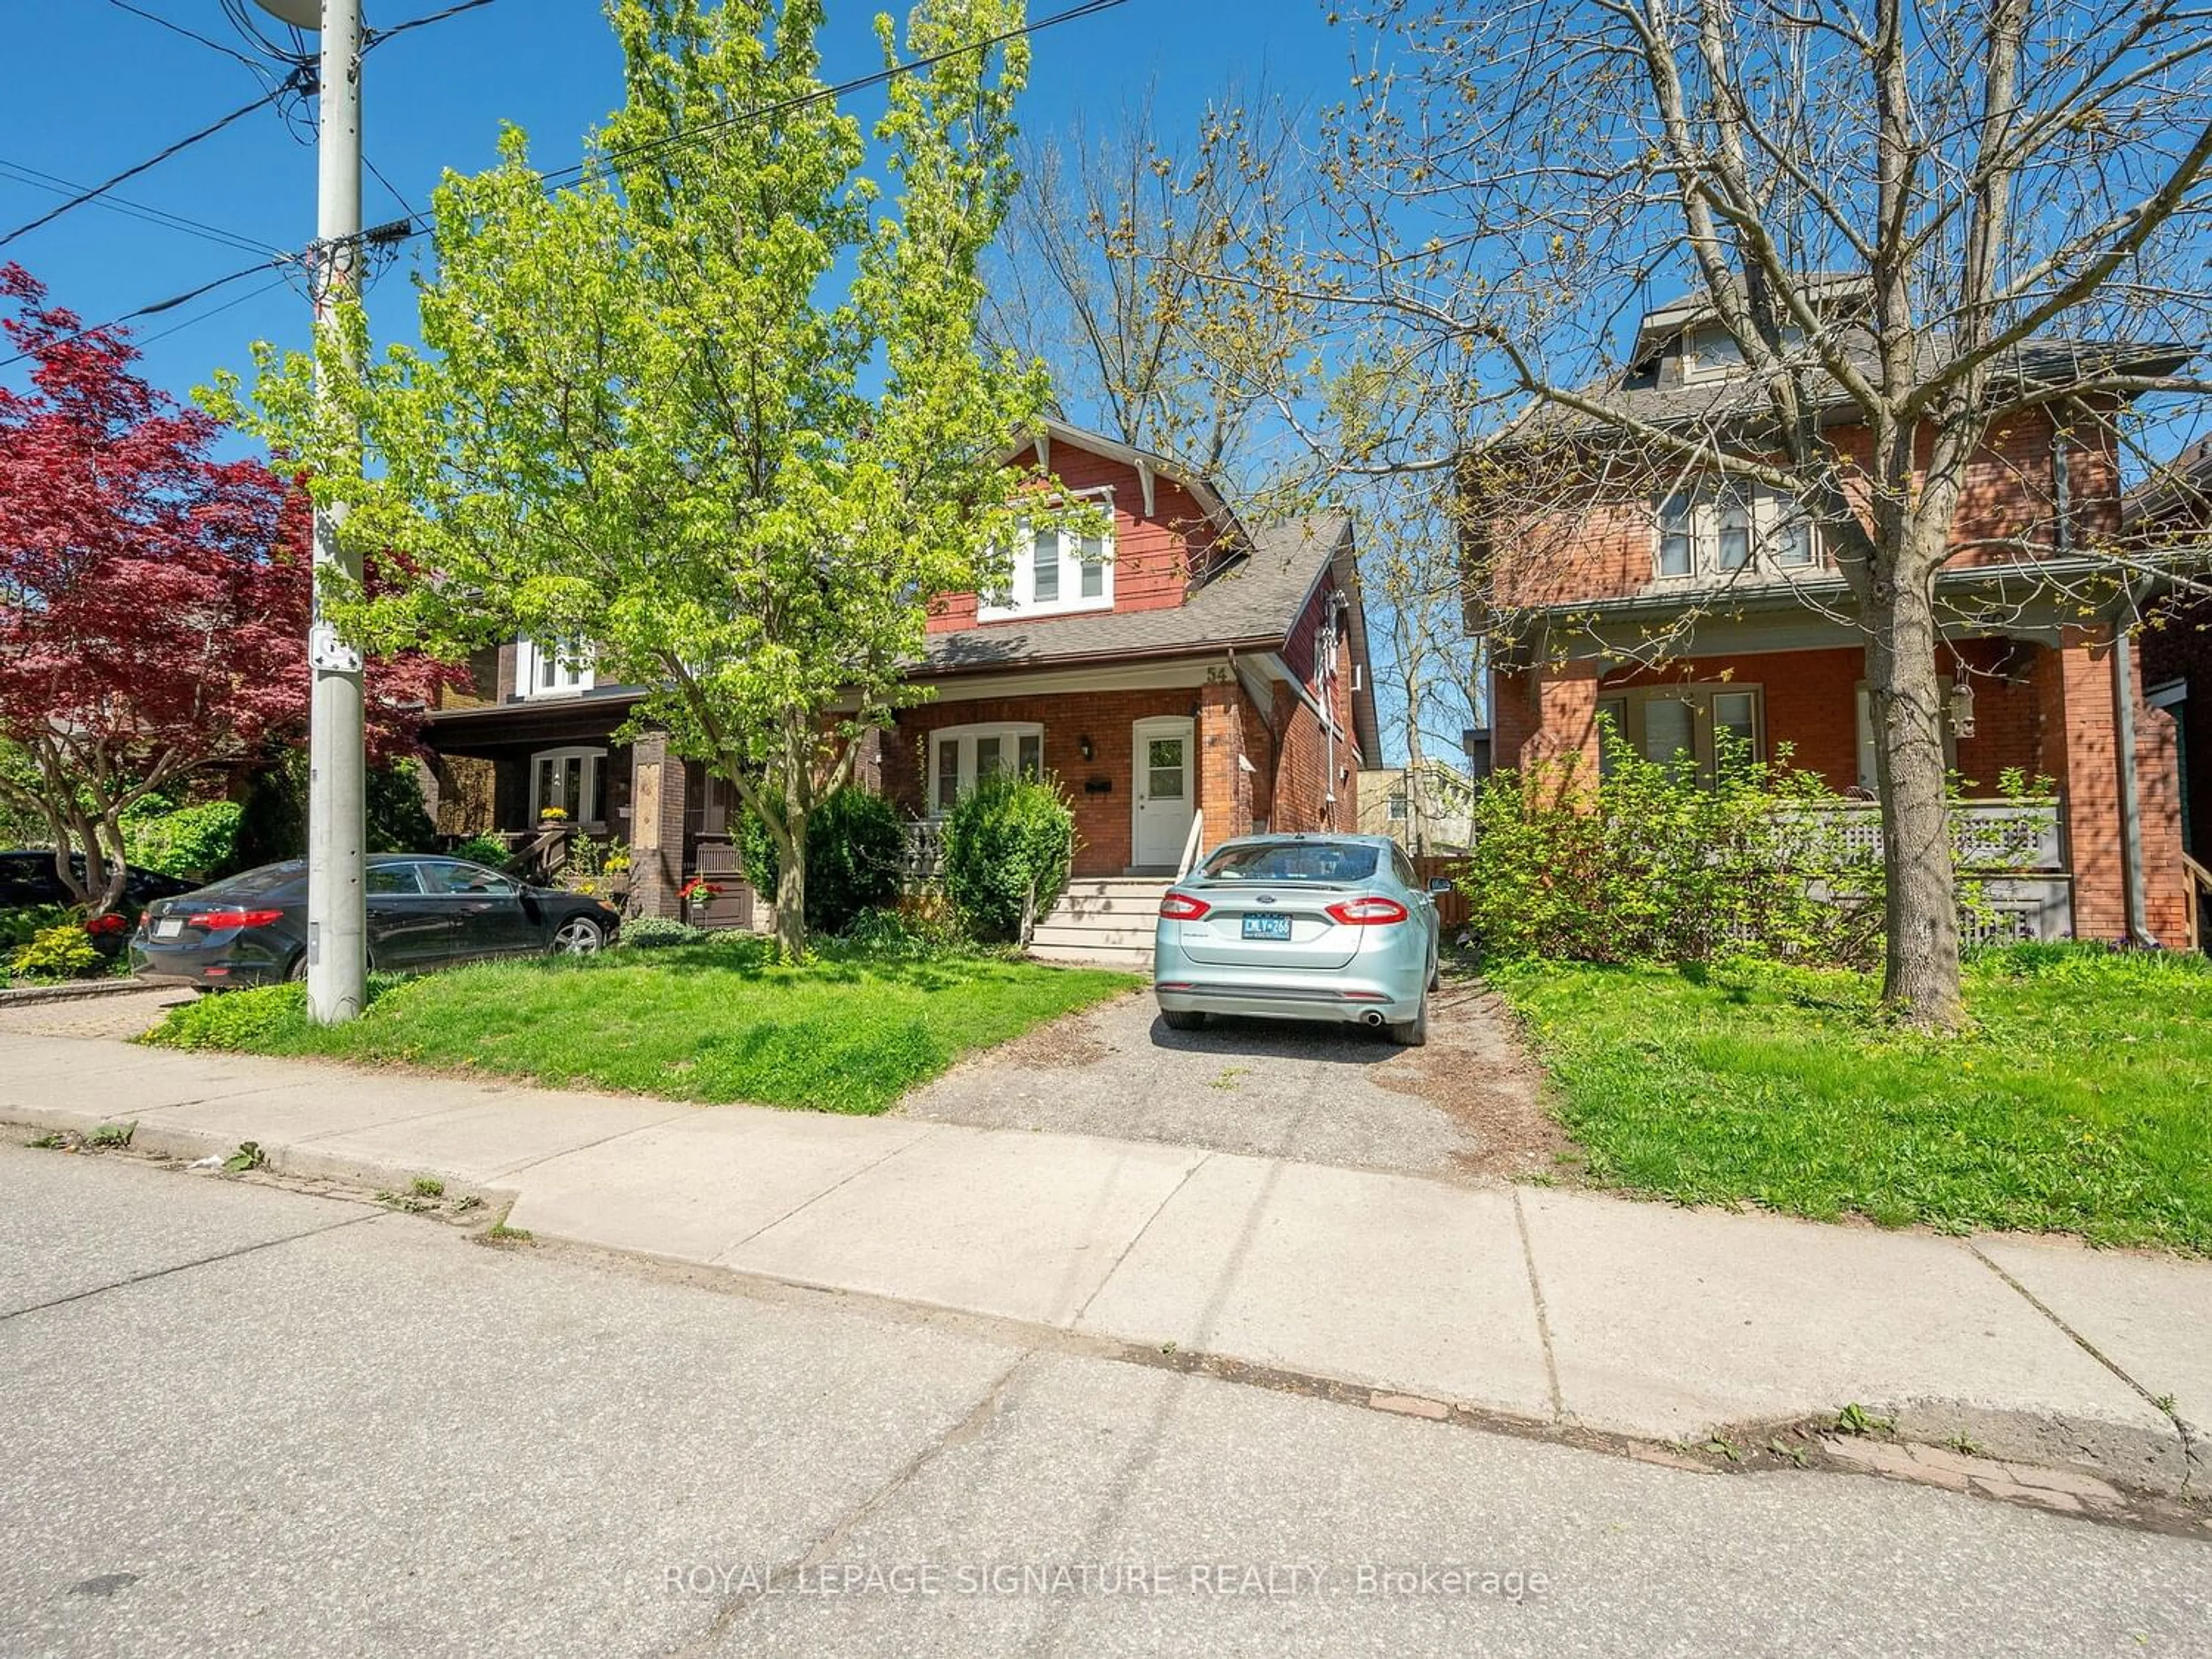 Street view for 54 South Oval, Hamilton Ontario L8S 1P8